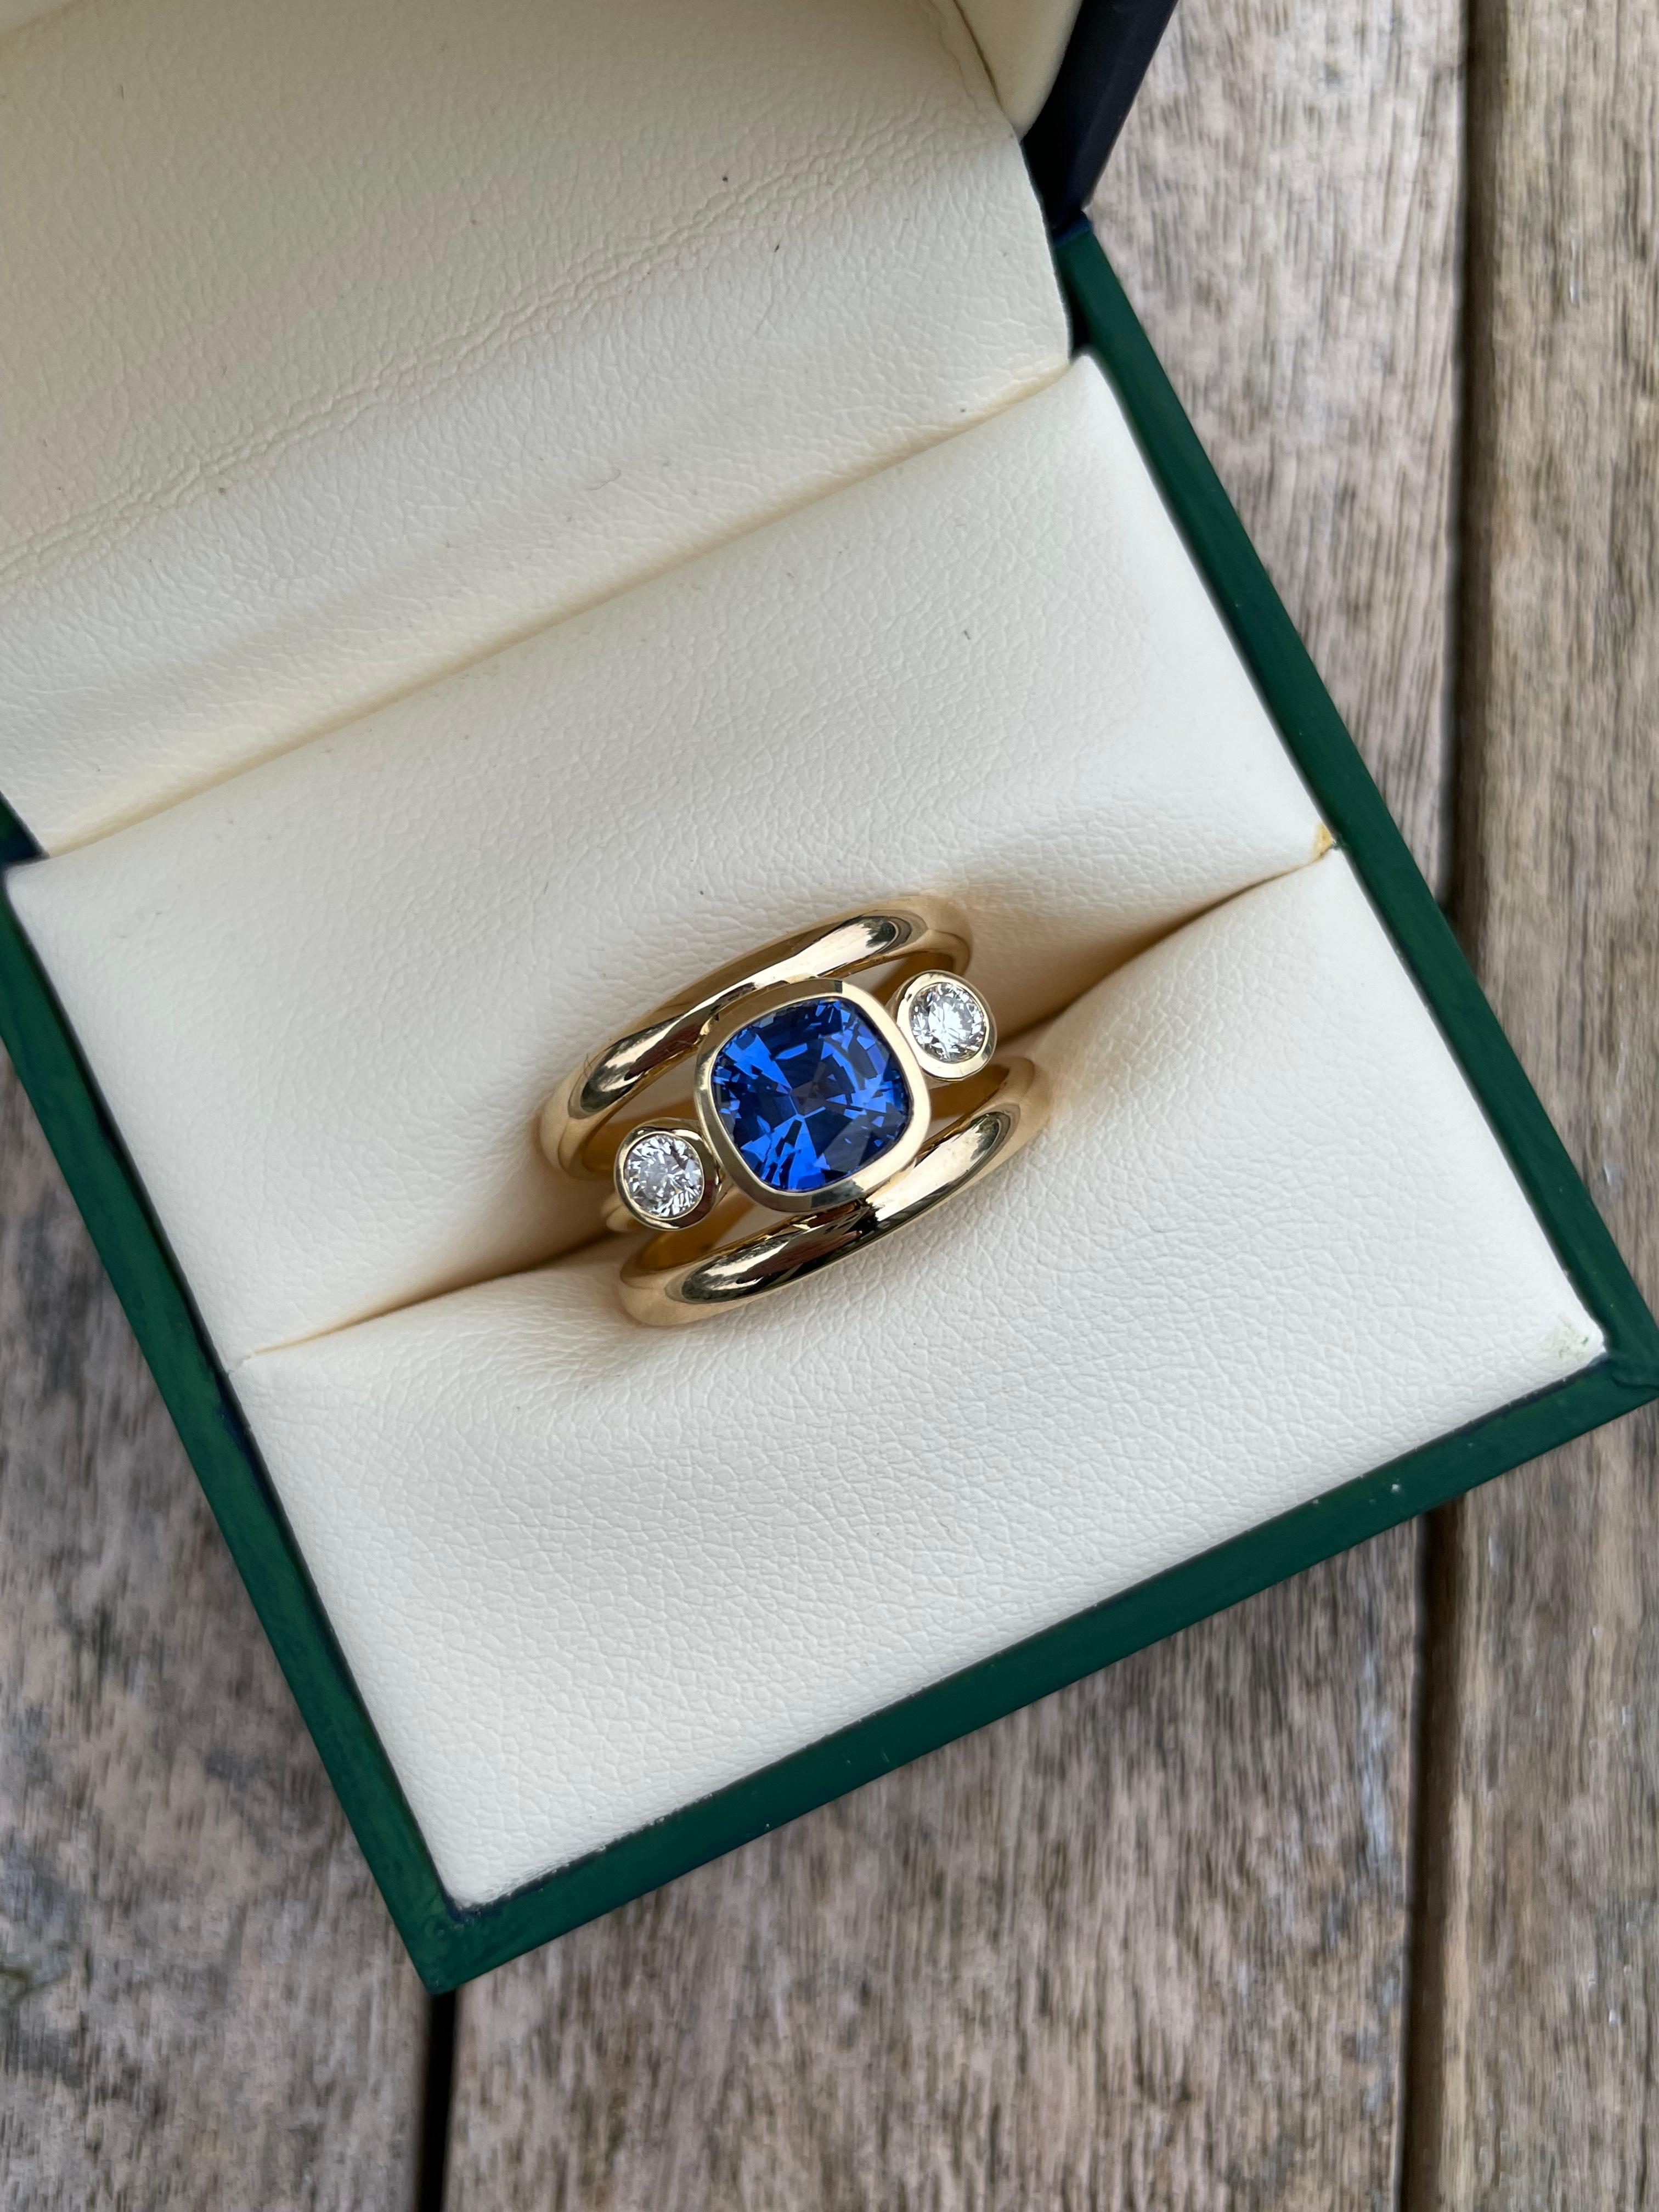  Minka Jewels - This beautiful and elegant 3 band ring set with the most incredible 2.35ct Sri Lankan, Royal Blue Sapphire.
This exceptional sapphire is set with a diamond on either side and in 18k yellow gold. Hand made in Londons historic